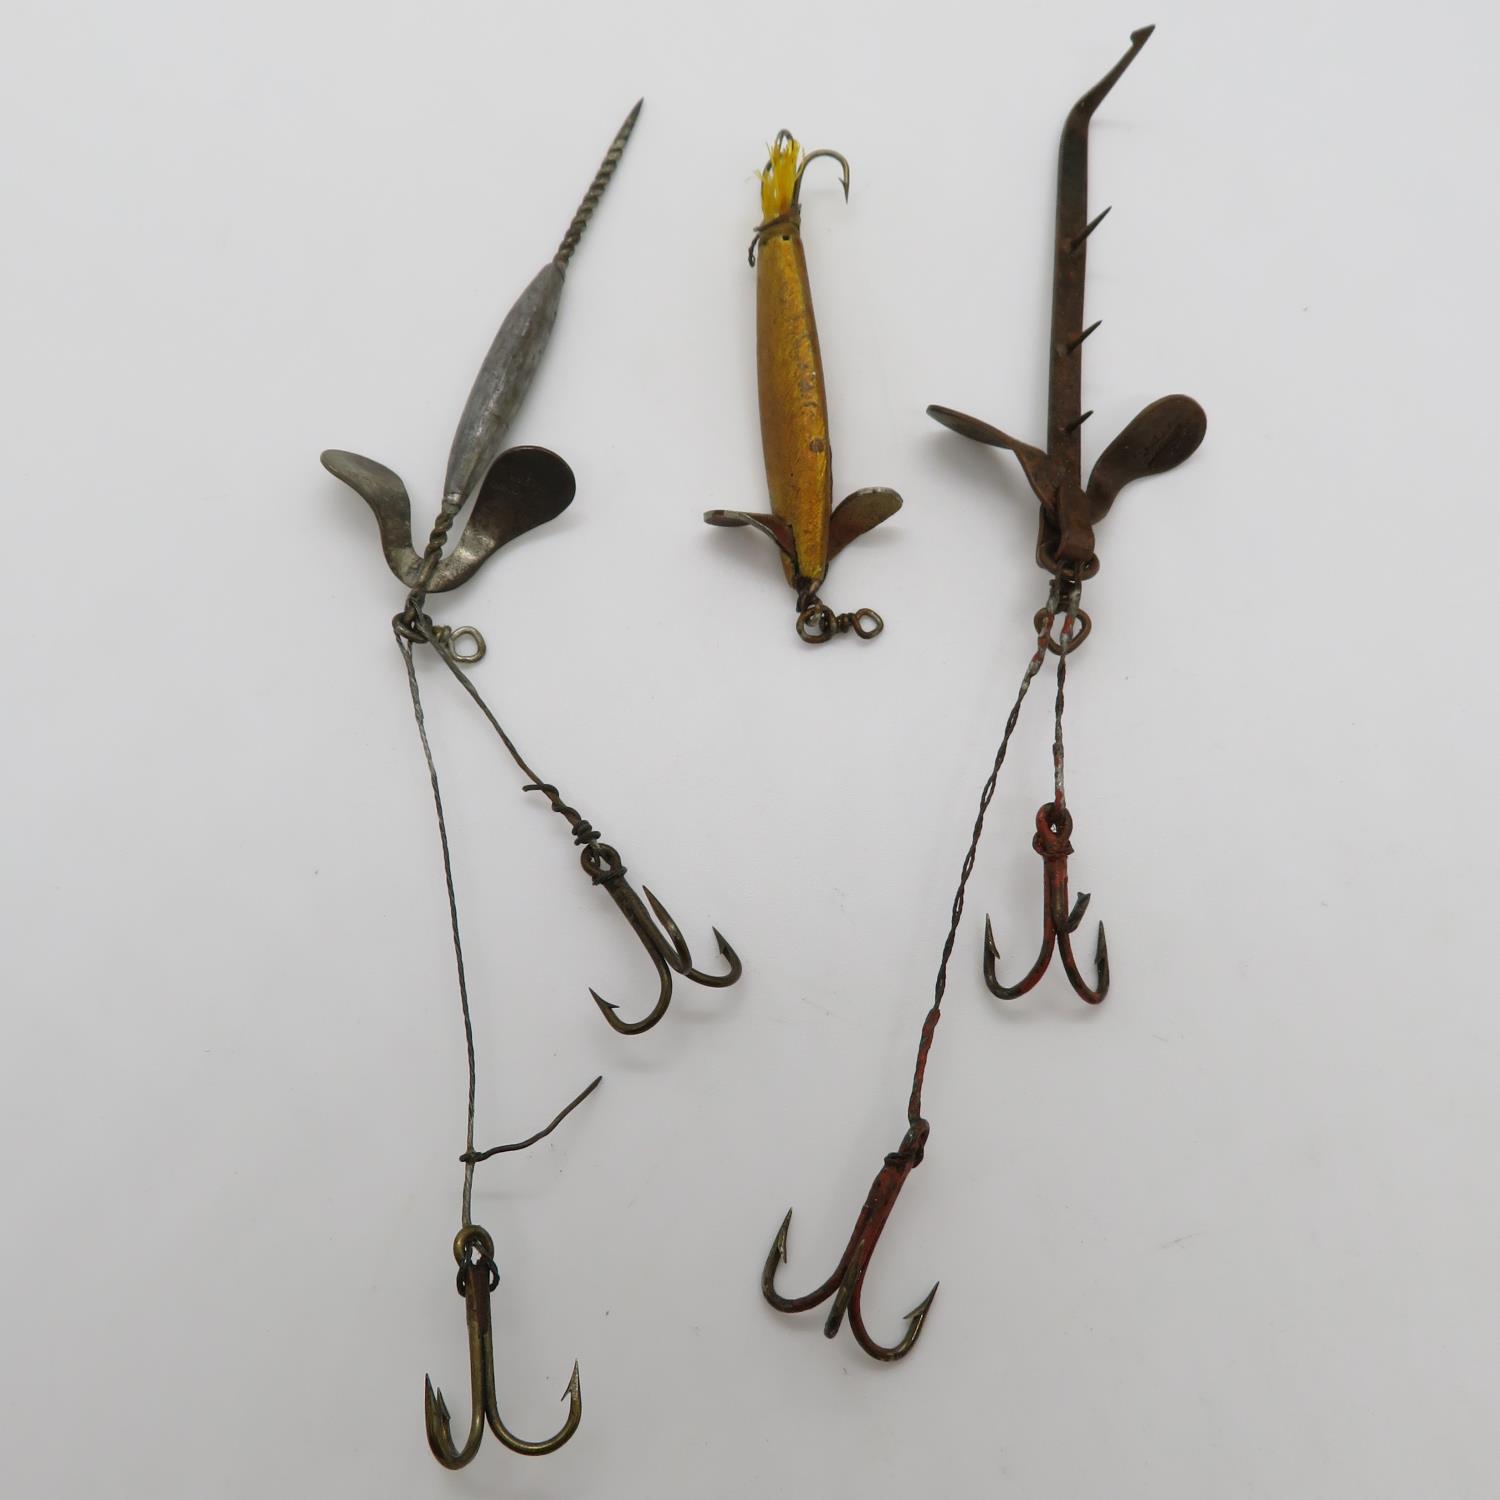 3x vintage Hardy lures 2x dead bait lures and 1x bottom sprat